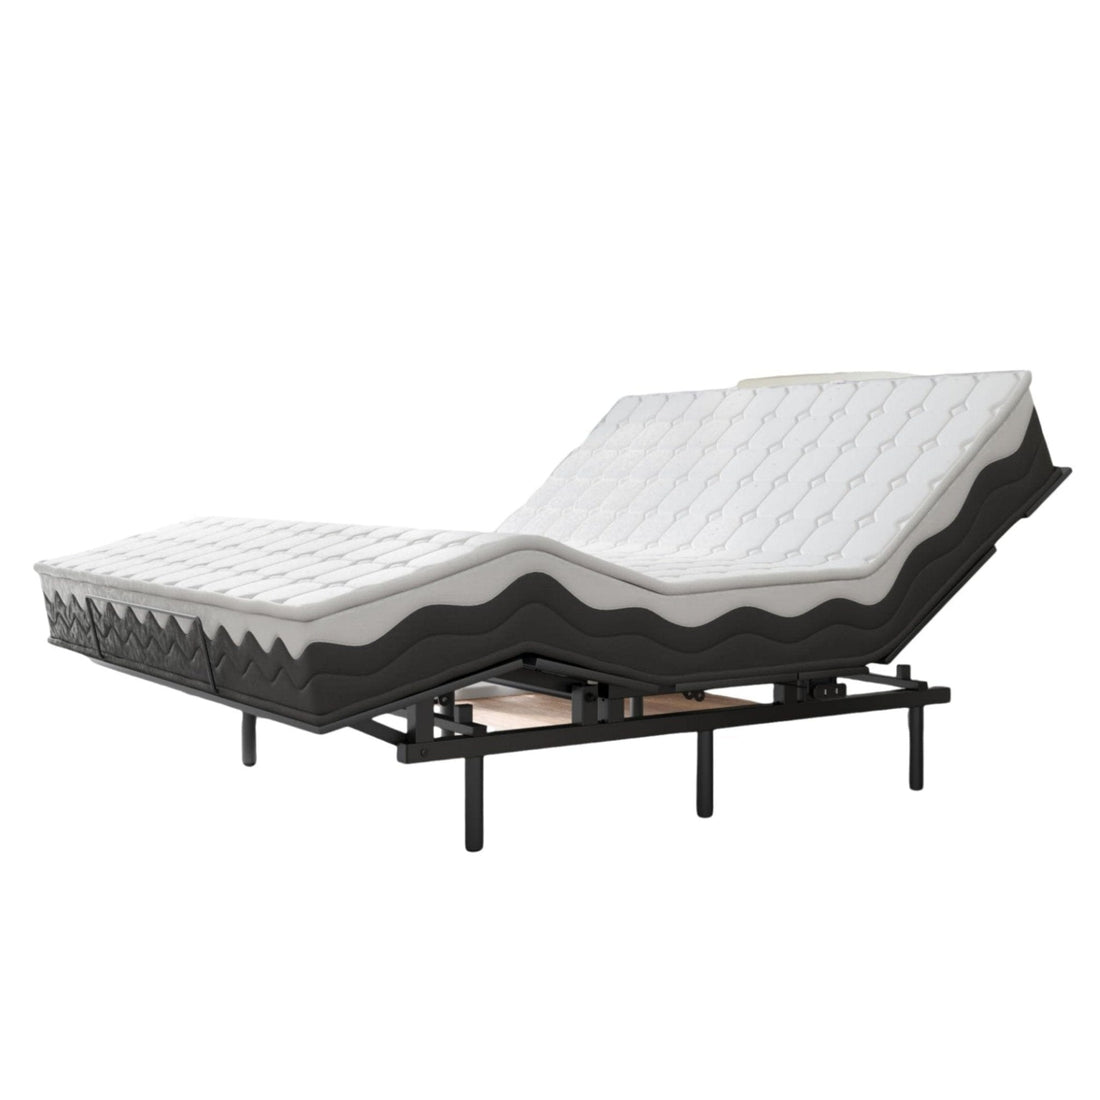 Queen Adjustable Bed Frame with Wireless Remote & Memory - GARVEE